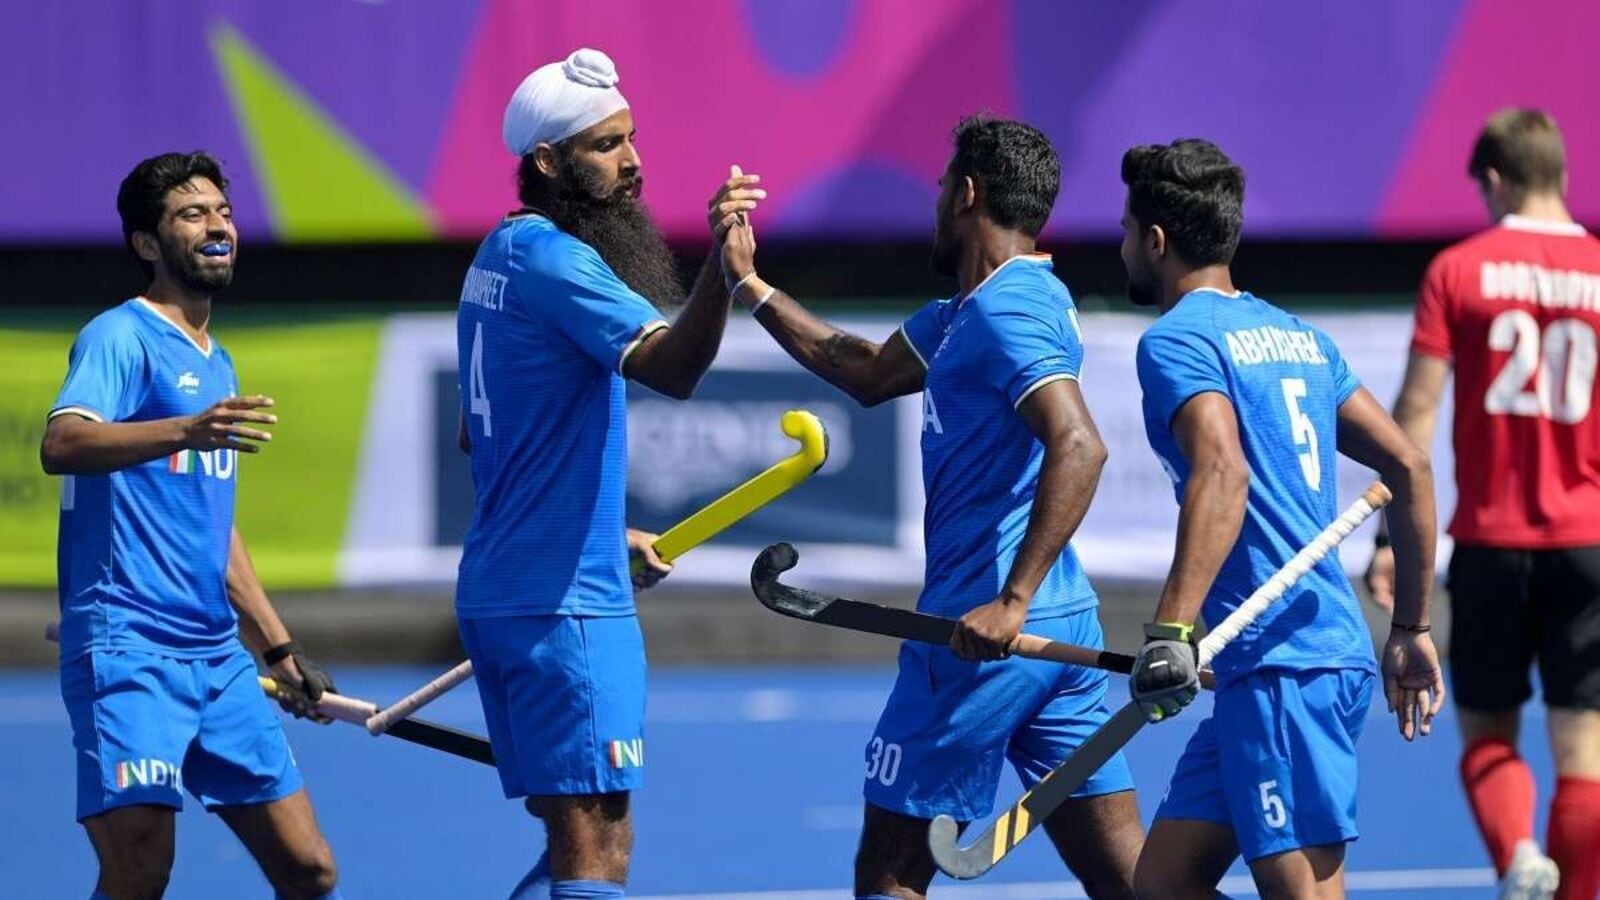 EXPLAINED: What is tie-breaker rule that will determine rank of teams in  Hockey World Cup group stage